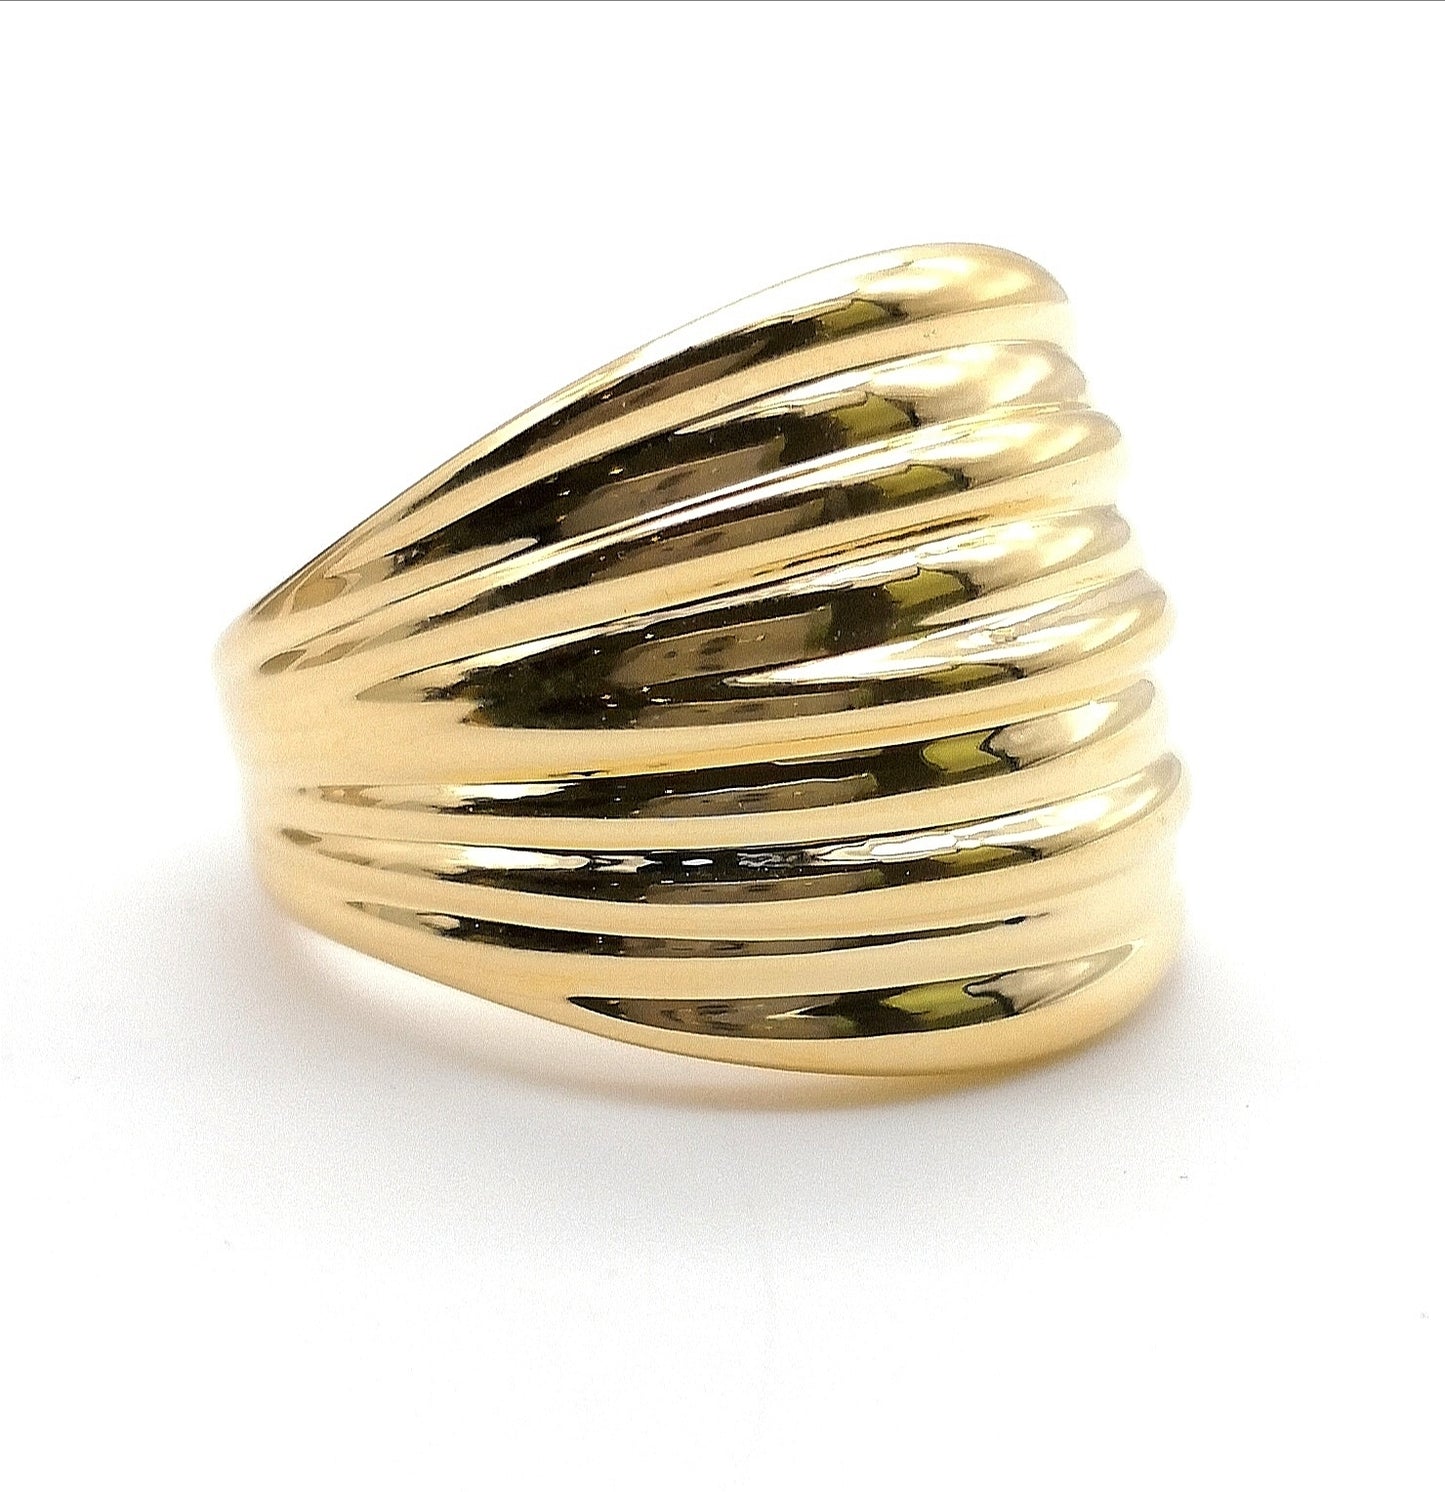 Soave gold - Yellow gold ring with scaled festooned band